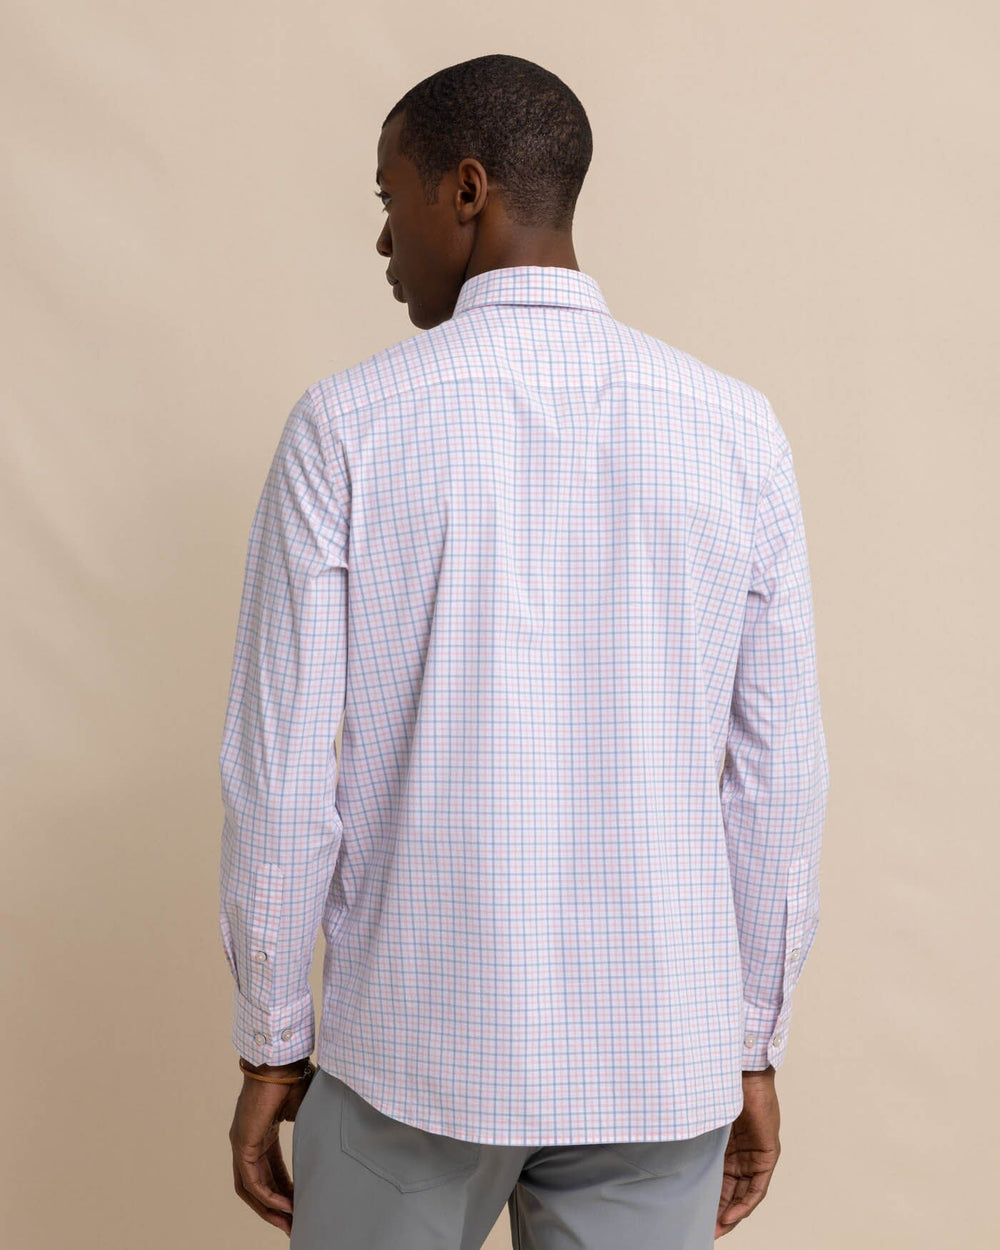 The back view of the Southern Tide Charleston Larkin Check Long Sleeve Sport Shirt by Southern Tide - Pale Rosette Pink